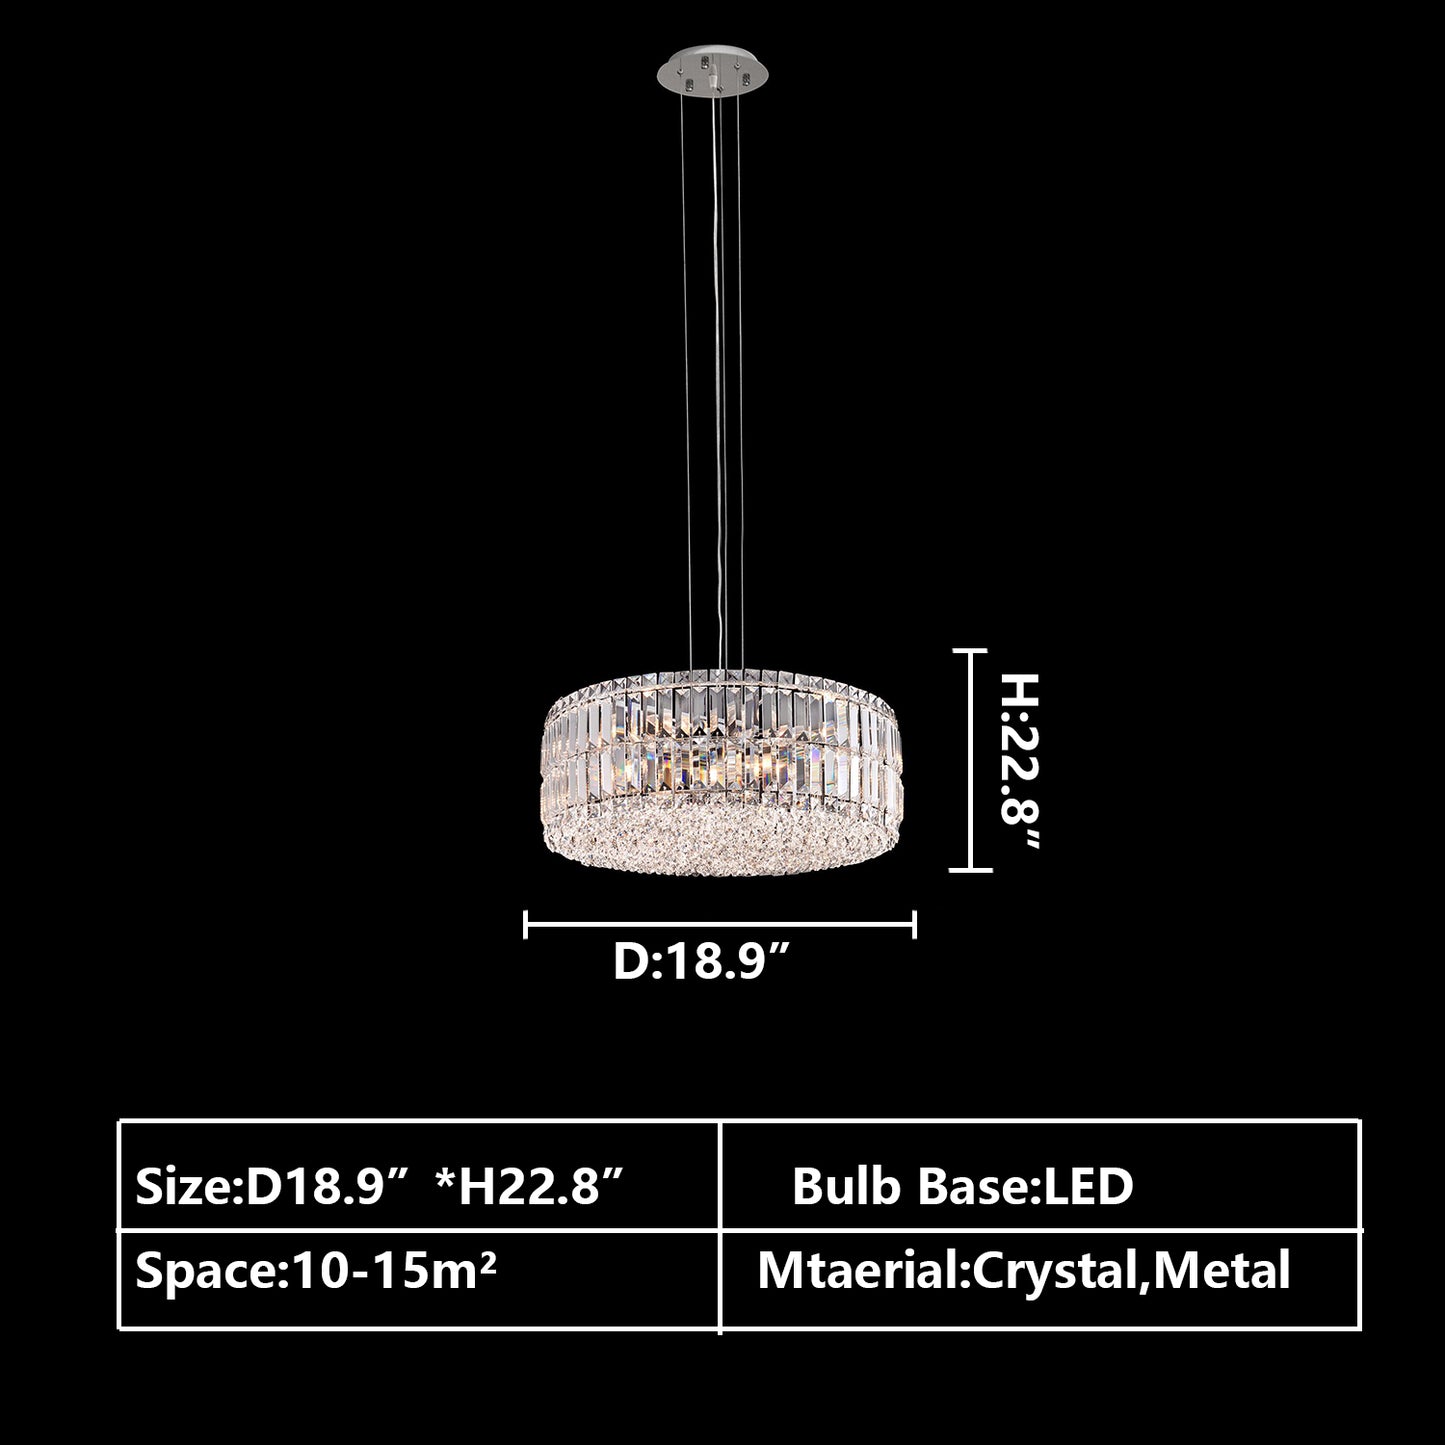 Round:D18.9"*H22.8" chandelier,chandeliers,pendant,round,oval,ceiling,crystal,metal,chrome,silver,clear crystal,adjustable,chain,light luxury,luxury,living room,dining room,foyer,entrys,hallway,bathroom,bedroom,home office